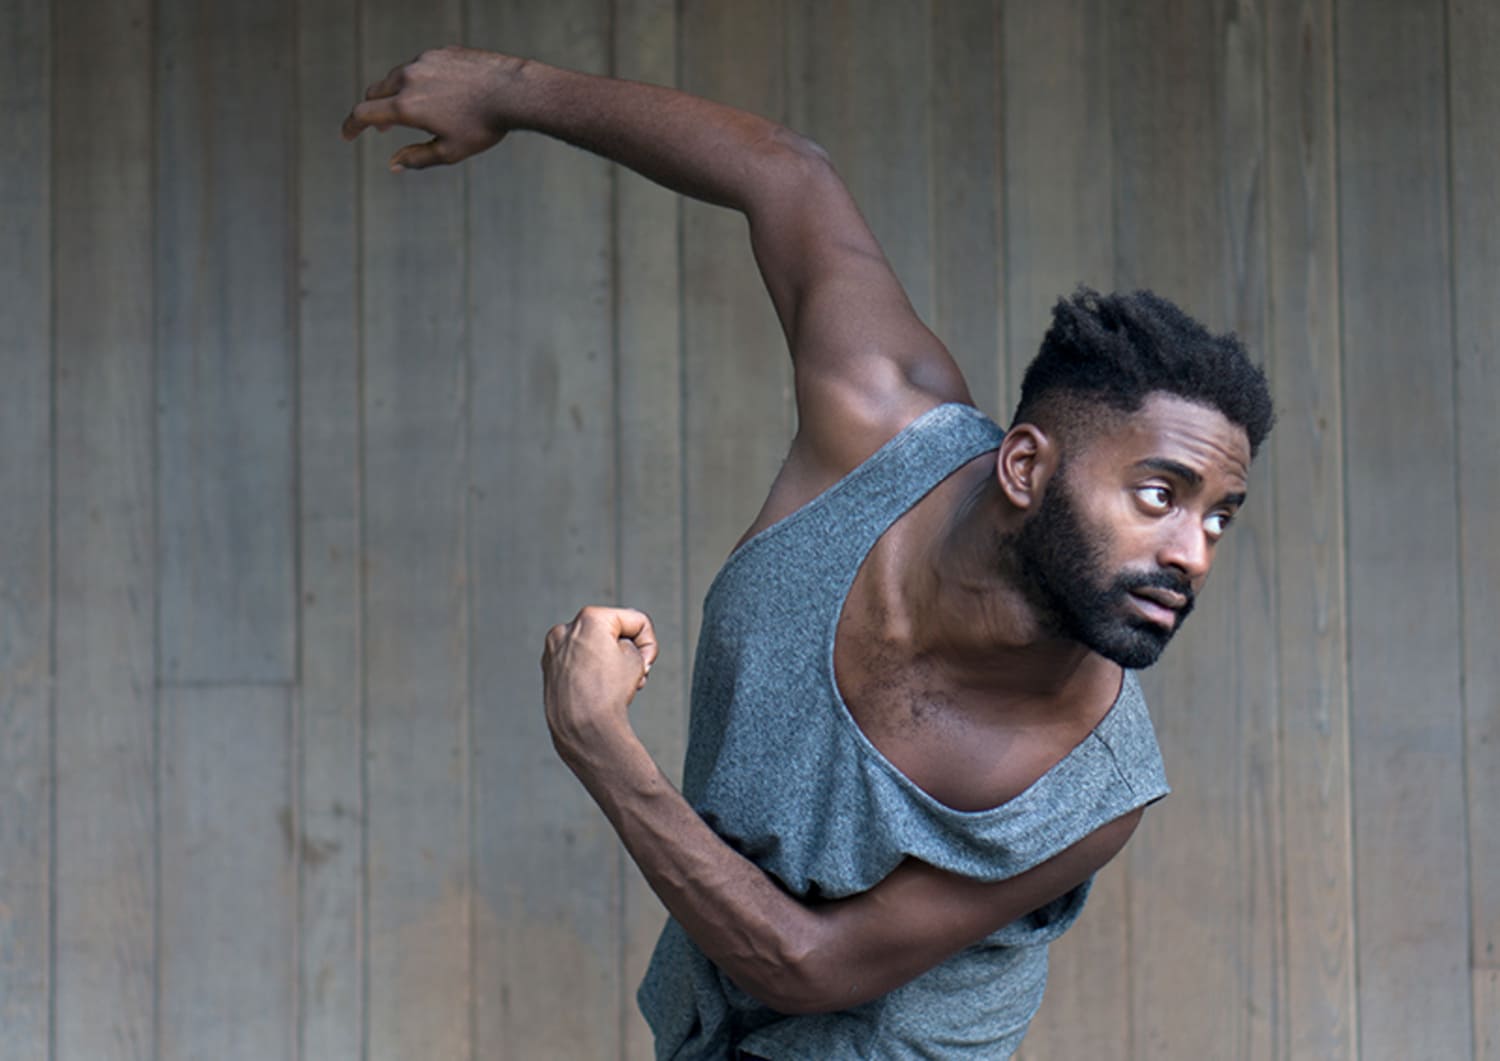 Jerron, a black man with short hair and short facial hair, pictured in motion from the hips up. His left arm is held at a 90 degree angle with his arm close to his body, his fist clenched. His right arm is raised above and behind him, his hand relaxed. He is wearing a graygrey tank top and pictured in front of a wood paneled wall.